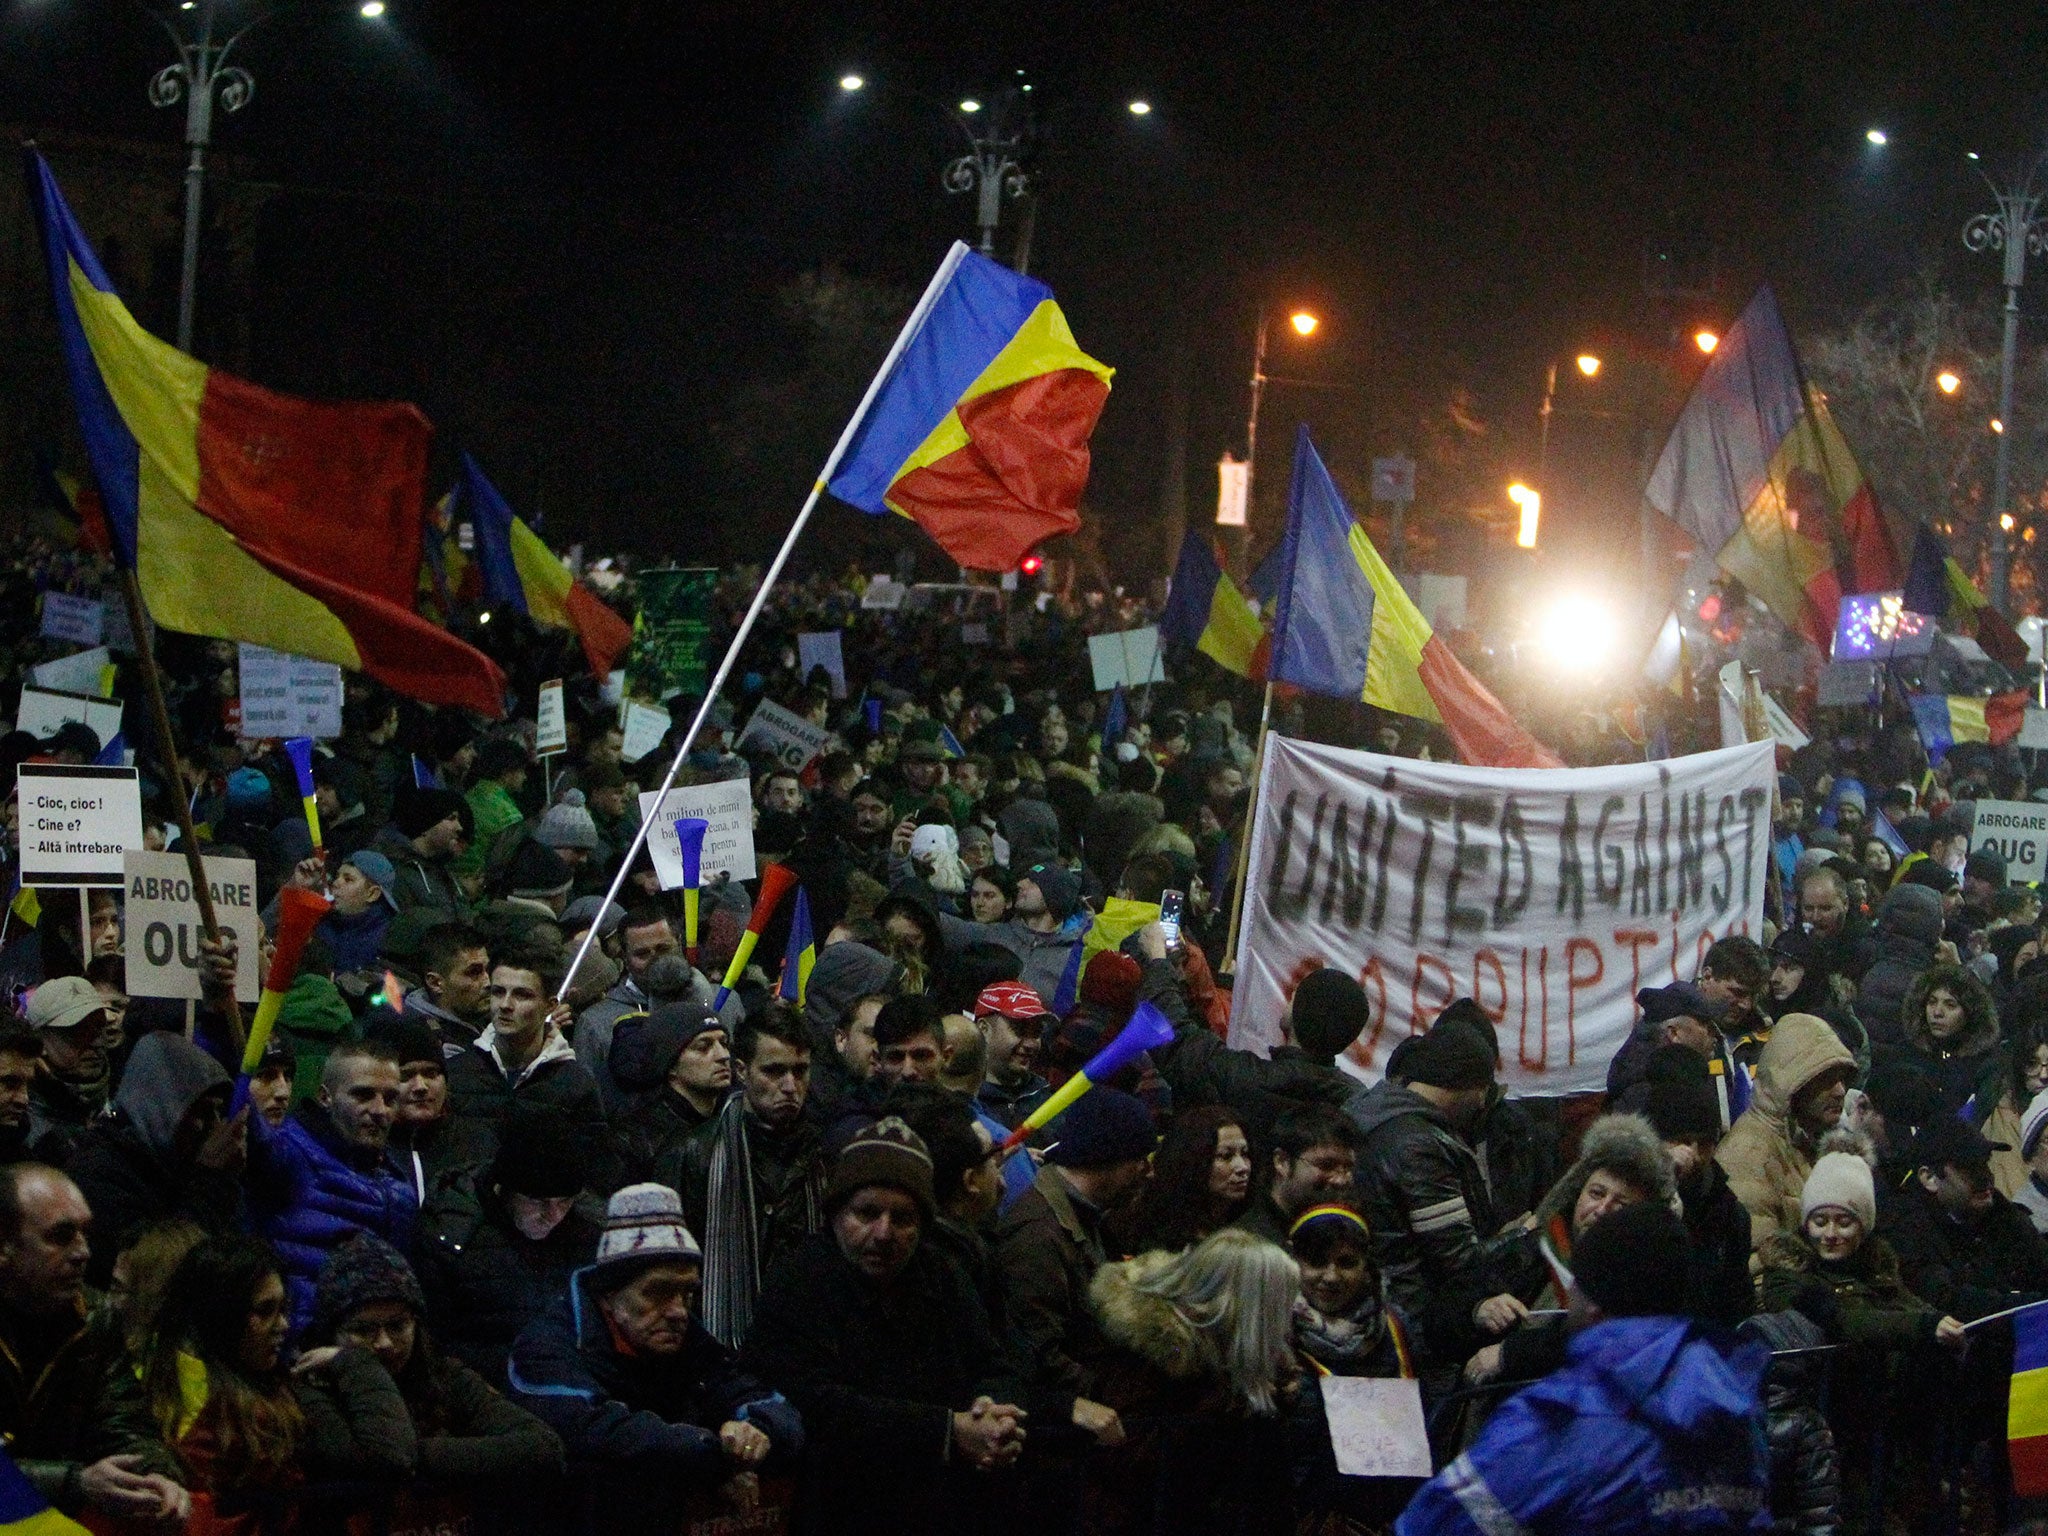 People wave Romanian flags during a protest in front of government headquarters in Bucharest, Romania, on 4 February